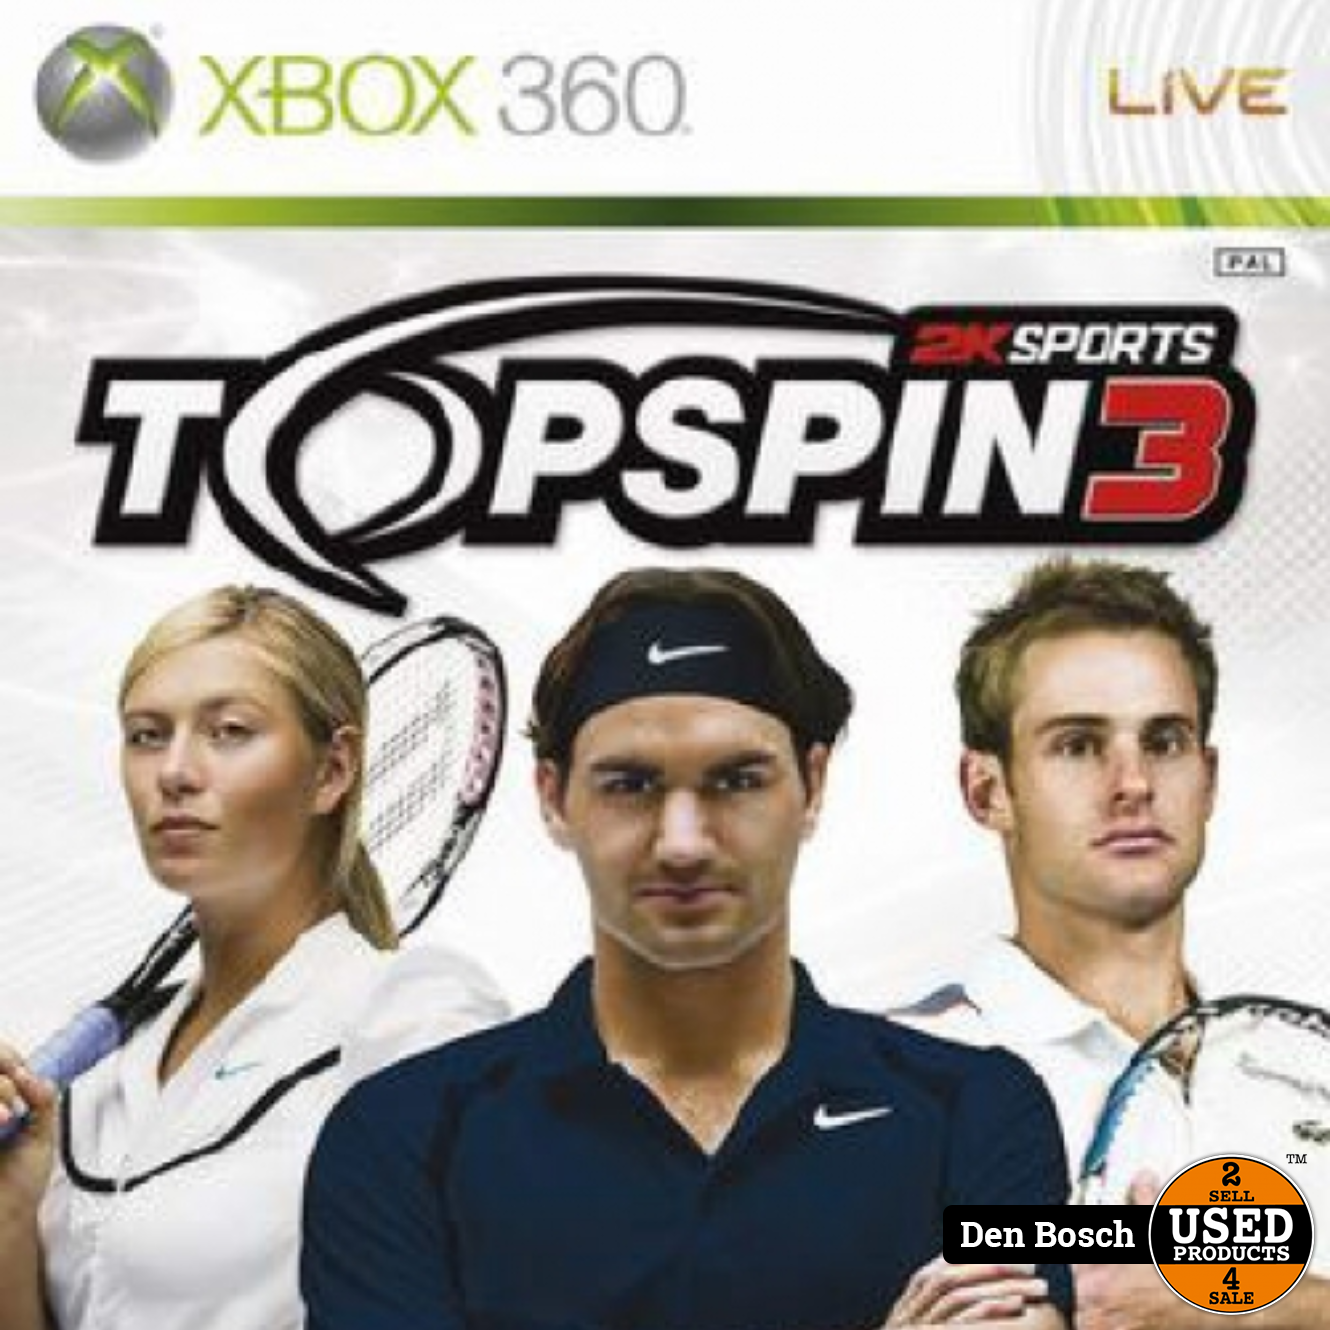 Top Spin 2 Pc Patch